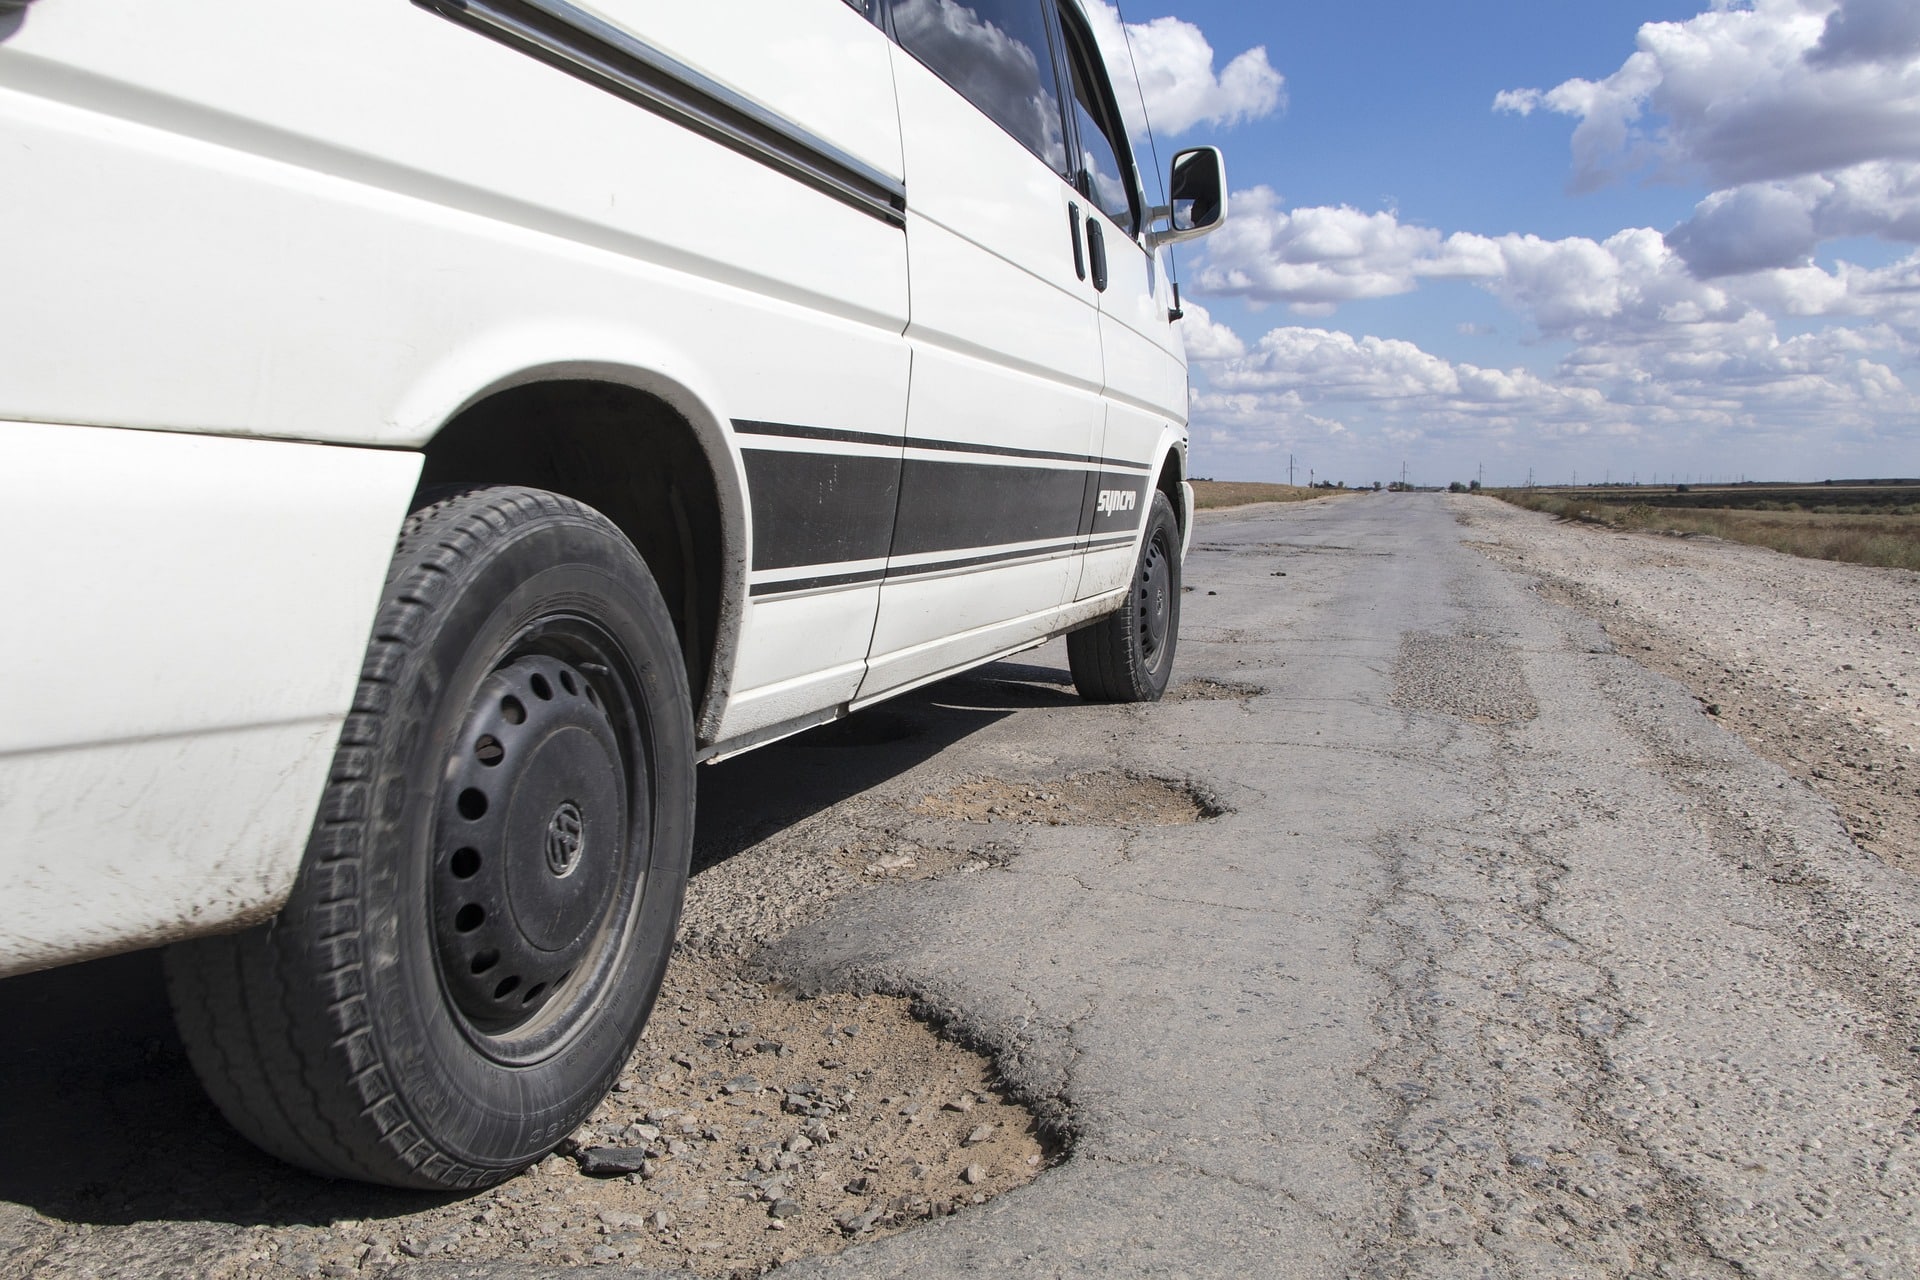 Best Tires for Bumpy Roads